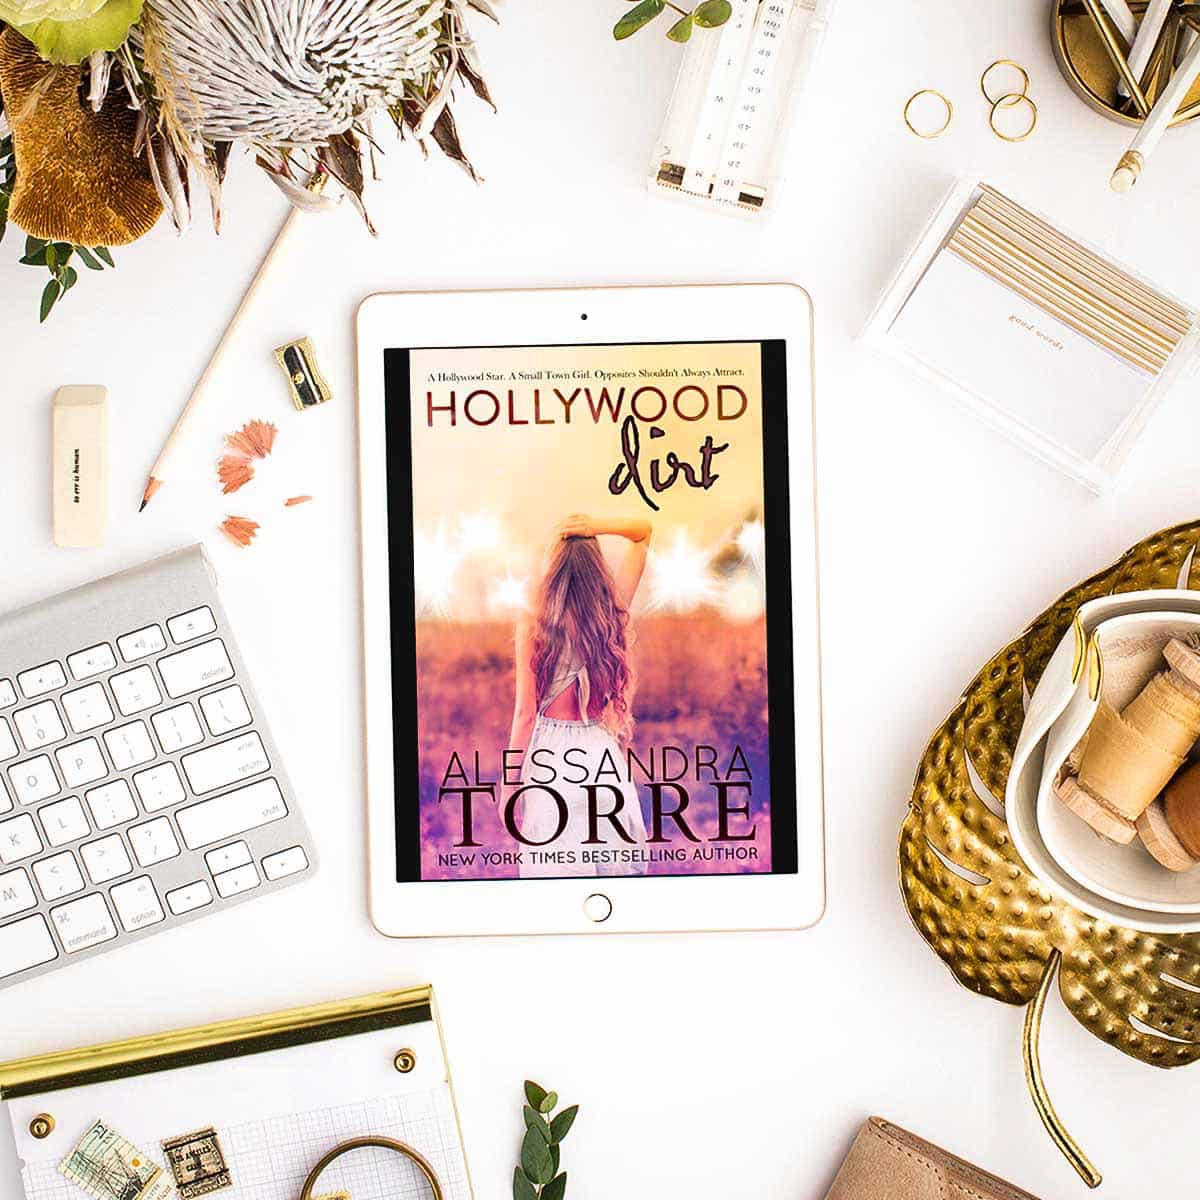 Hollywood Dirt by Alessandra Torre – Sassy Southern Romance!